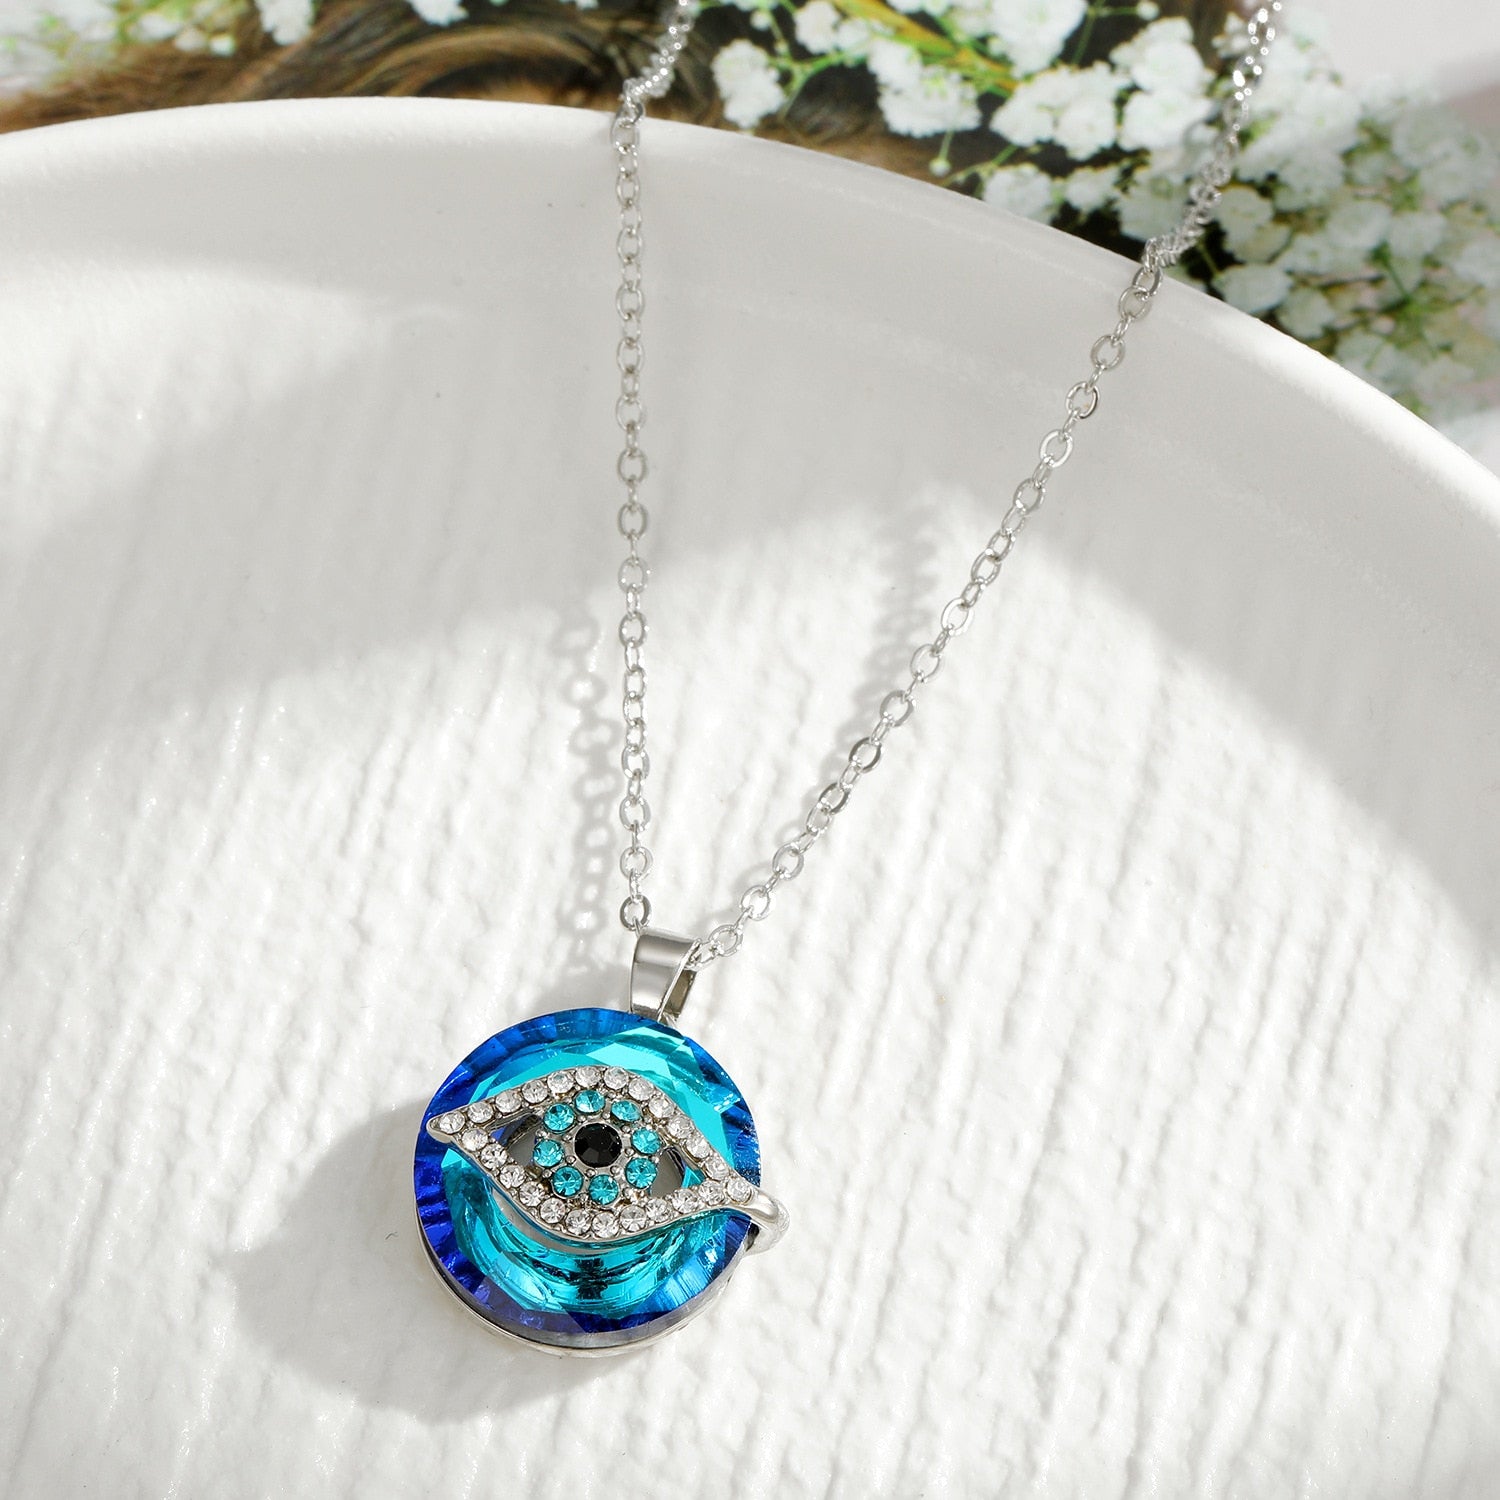 Fashion Evil Eye Pendant Necklaces for Women Men Vintage Crystal Rhinestone Geometric Blue Eye Sweater Chain Necklace Jewelry - Charlie Dolly